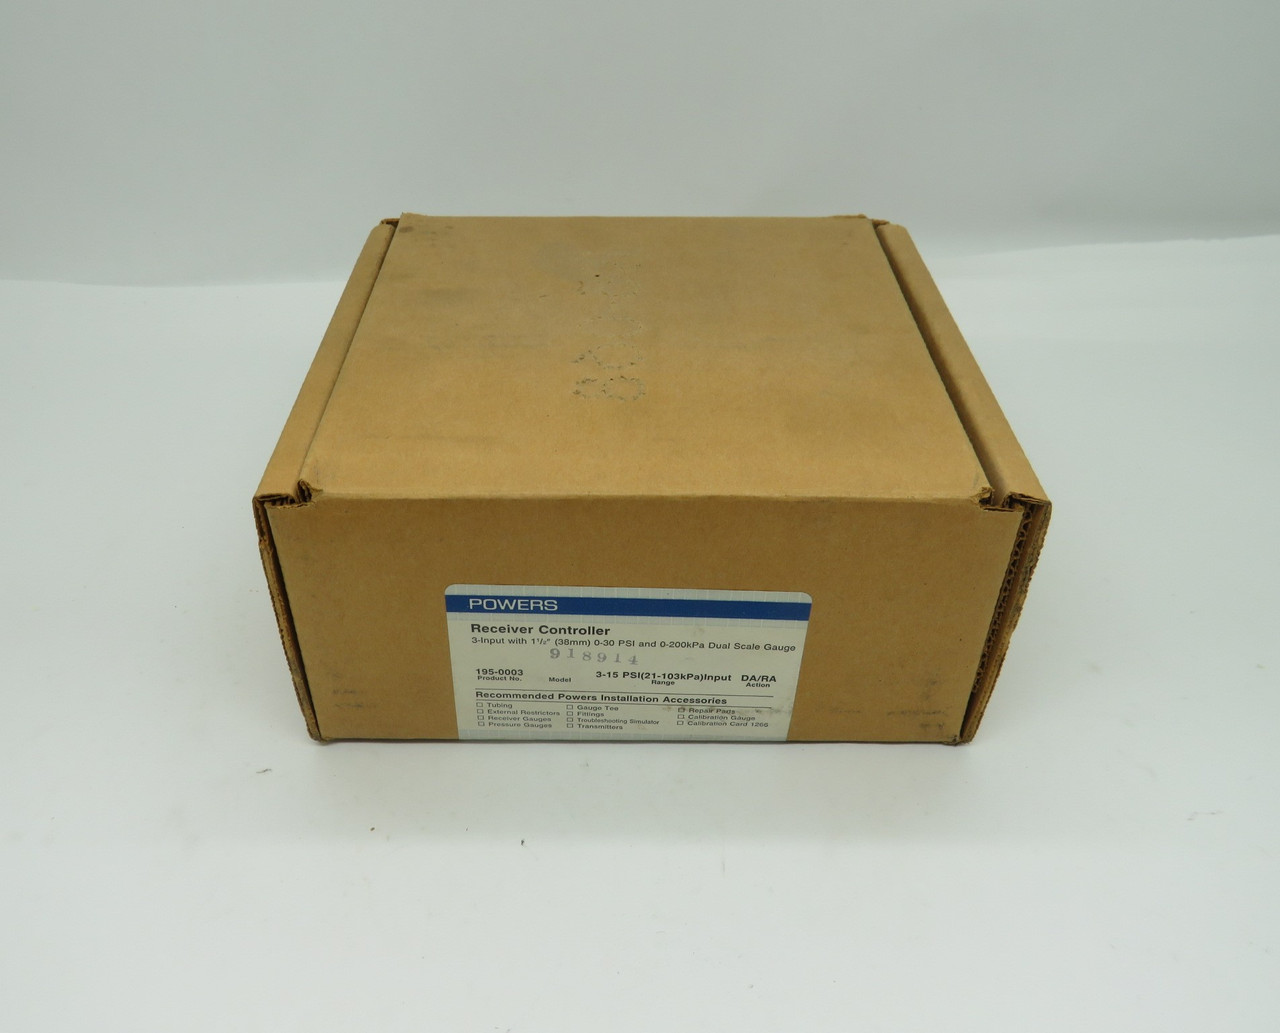 Powers 195-0003 Multiple Input Receiver Controller 0-30psi 0-200kPa NEW